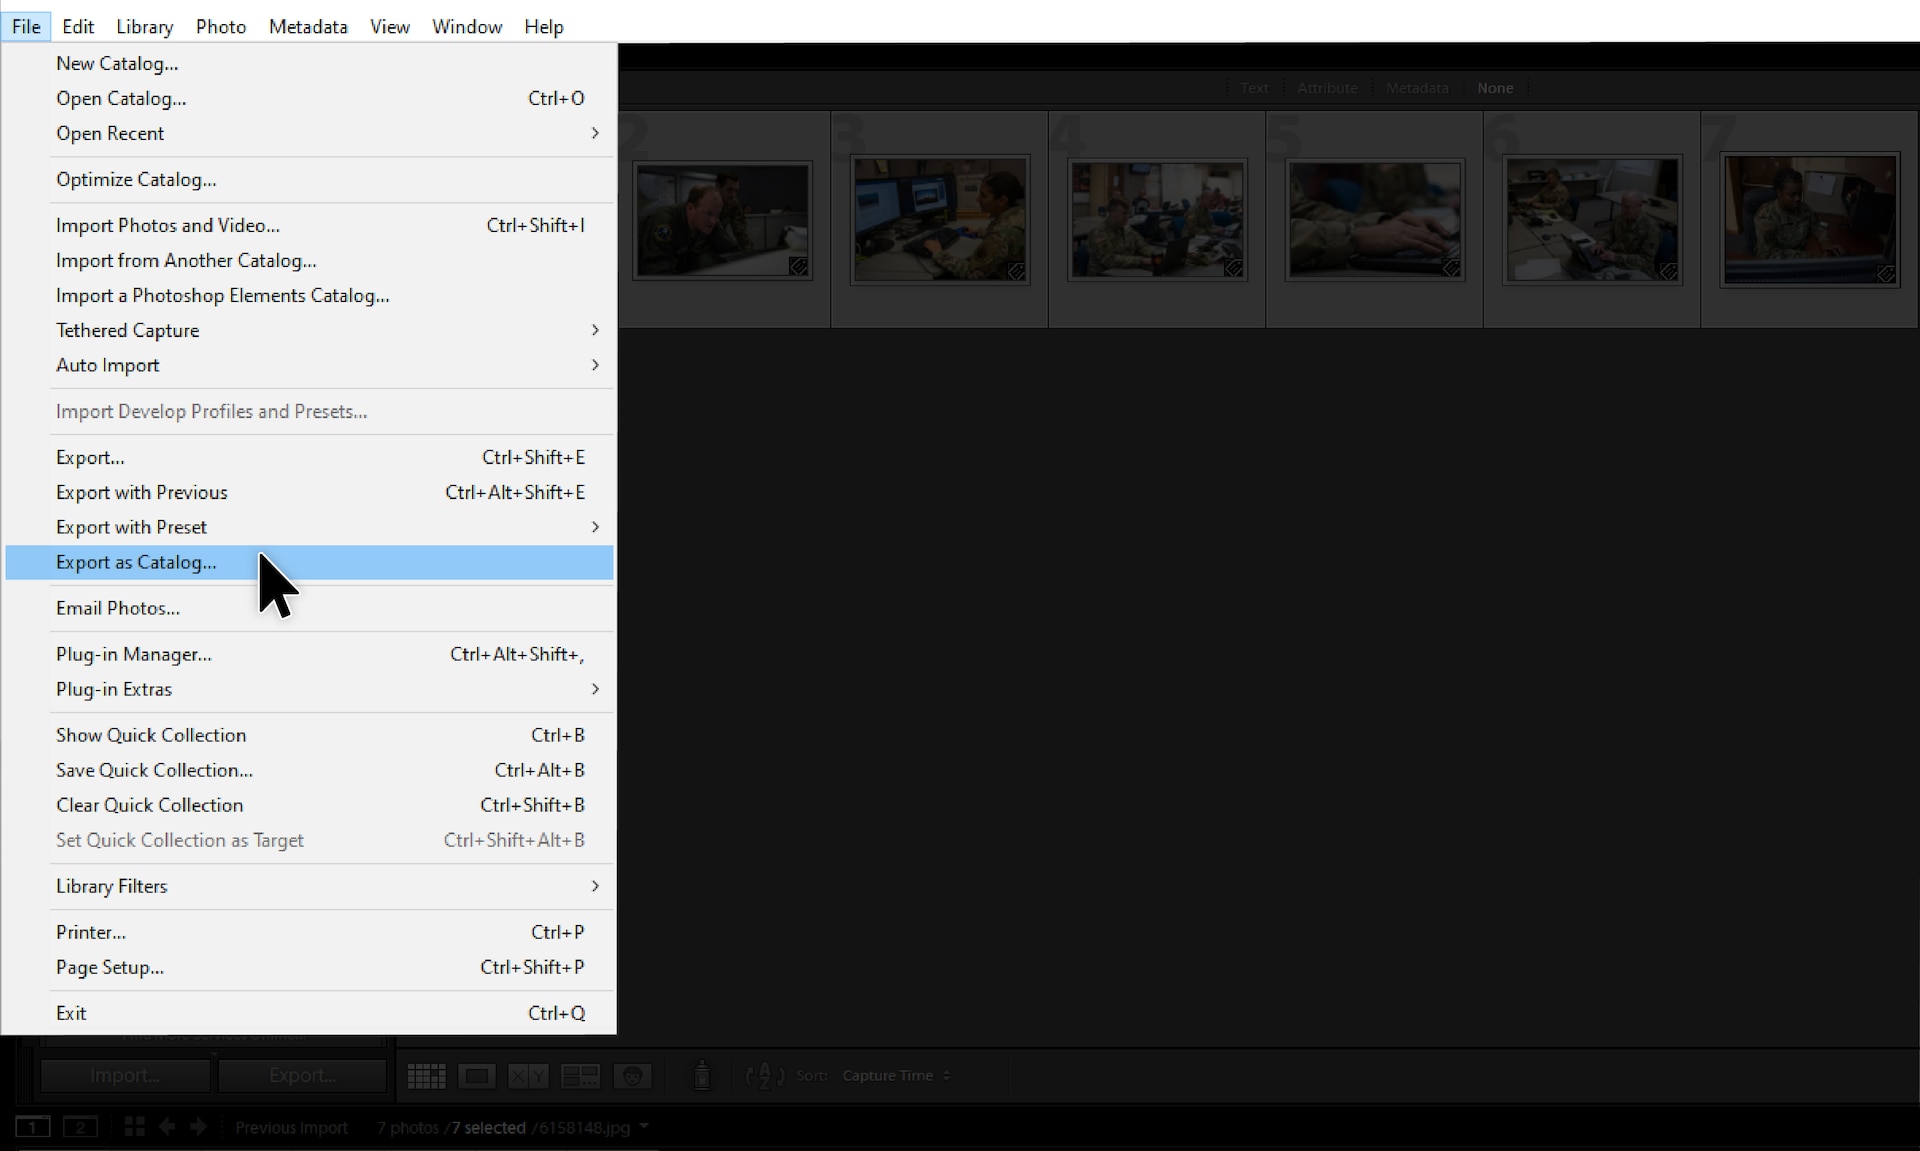 Screenshot of Adobe Lightroom with file menu open and export as catalog option highlighted.